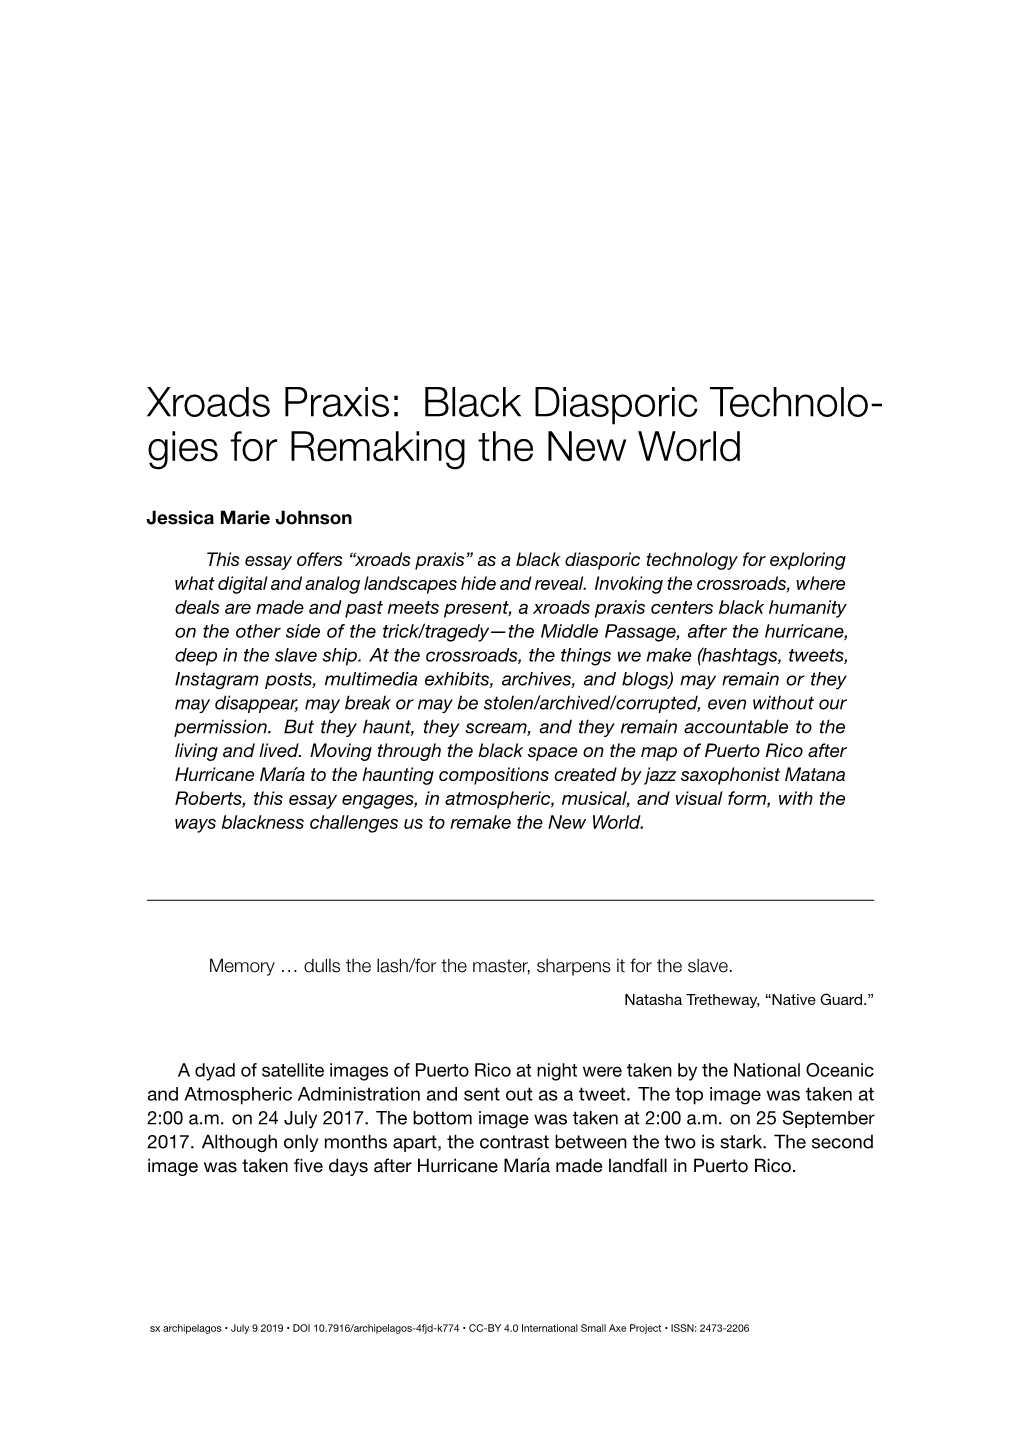 Xroads Praxis: Black Diasporic Technolo- Gies for Remaking the New World